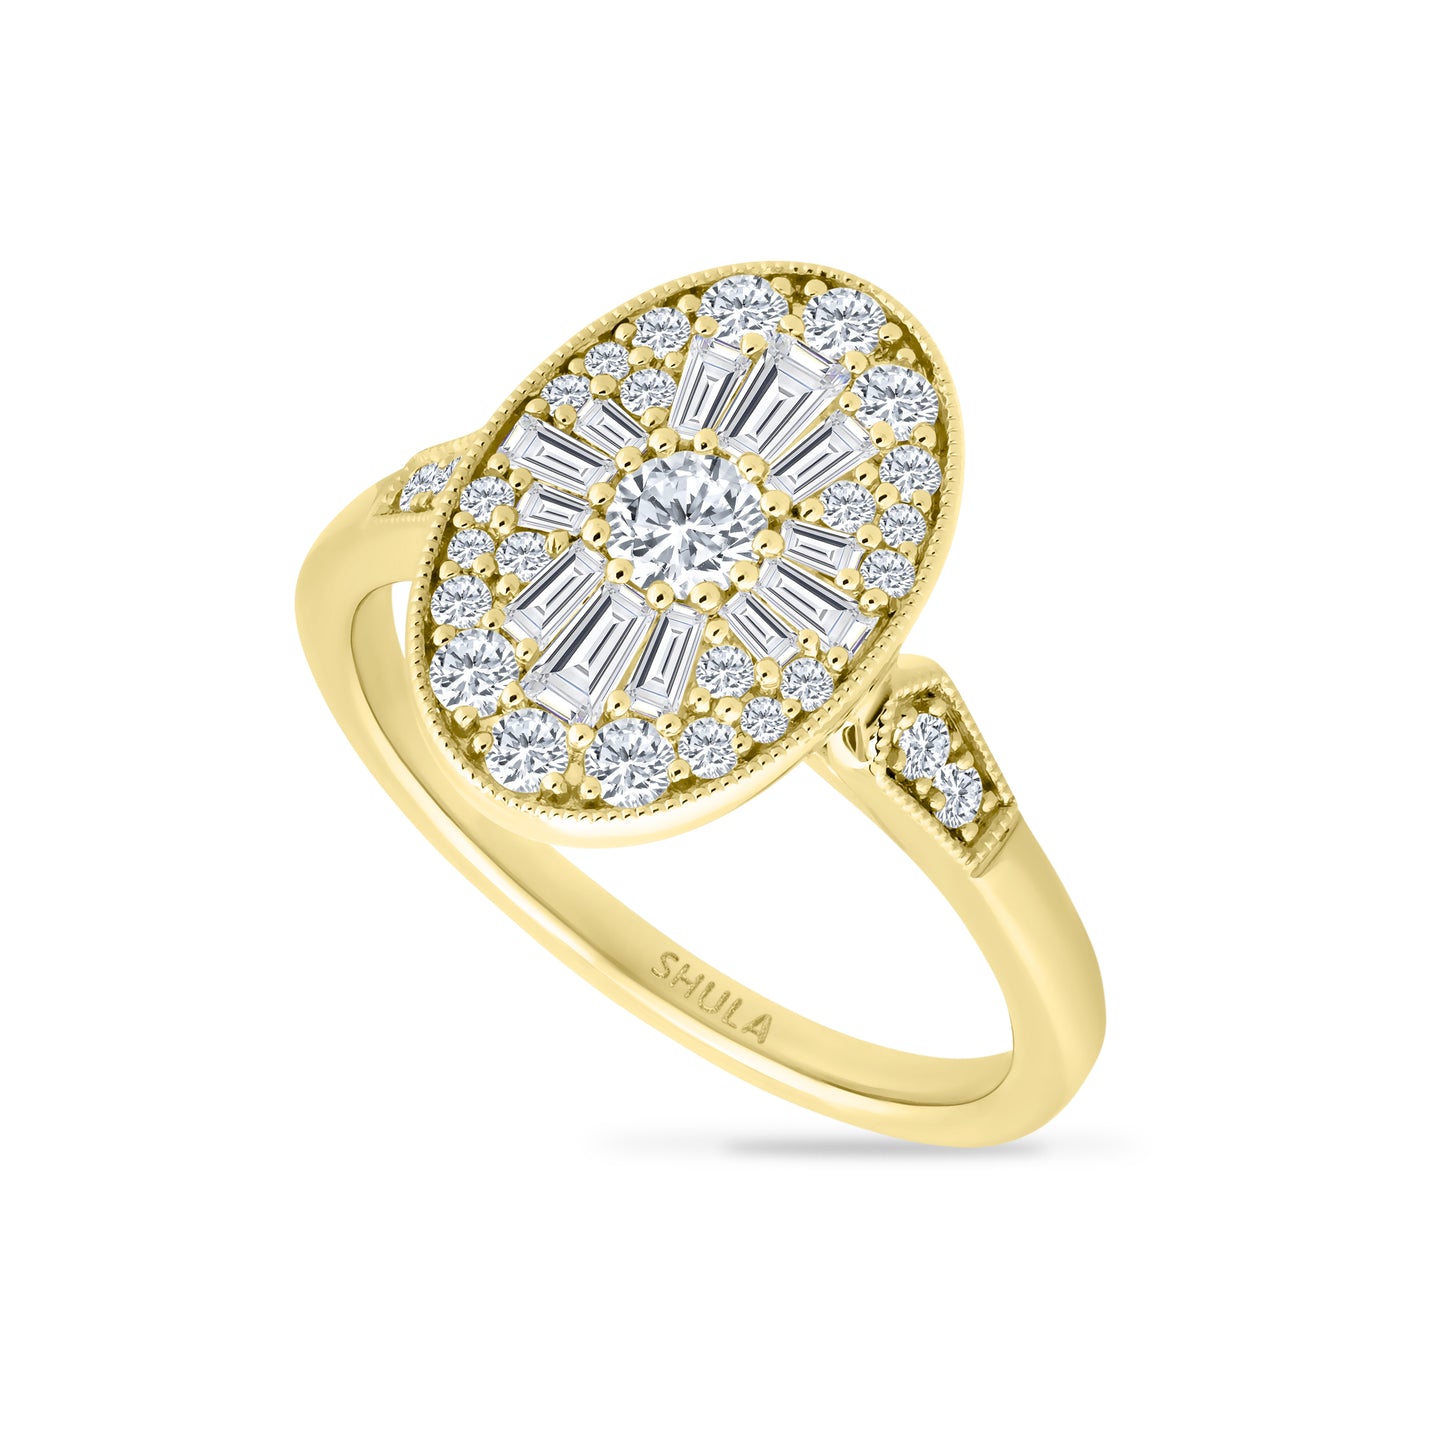 14K OVAL DESIGN RING WITH ROUND DIAMONDS 0.46CT AND BAGUETTE DIAMONDS 0.24CT